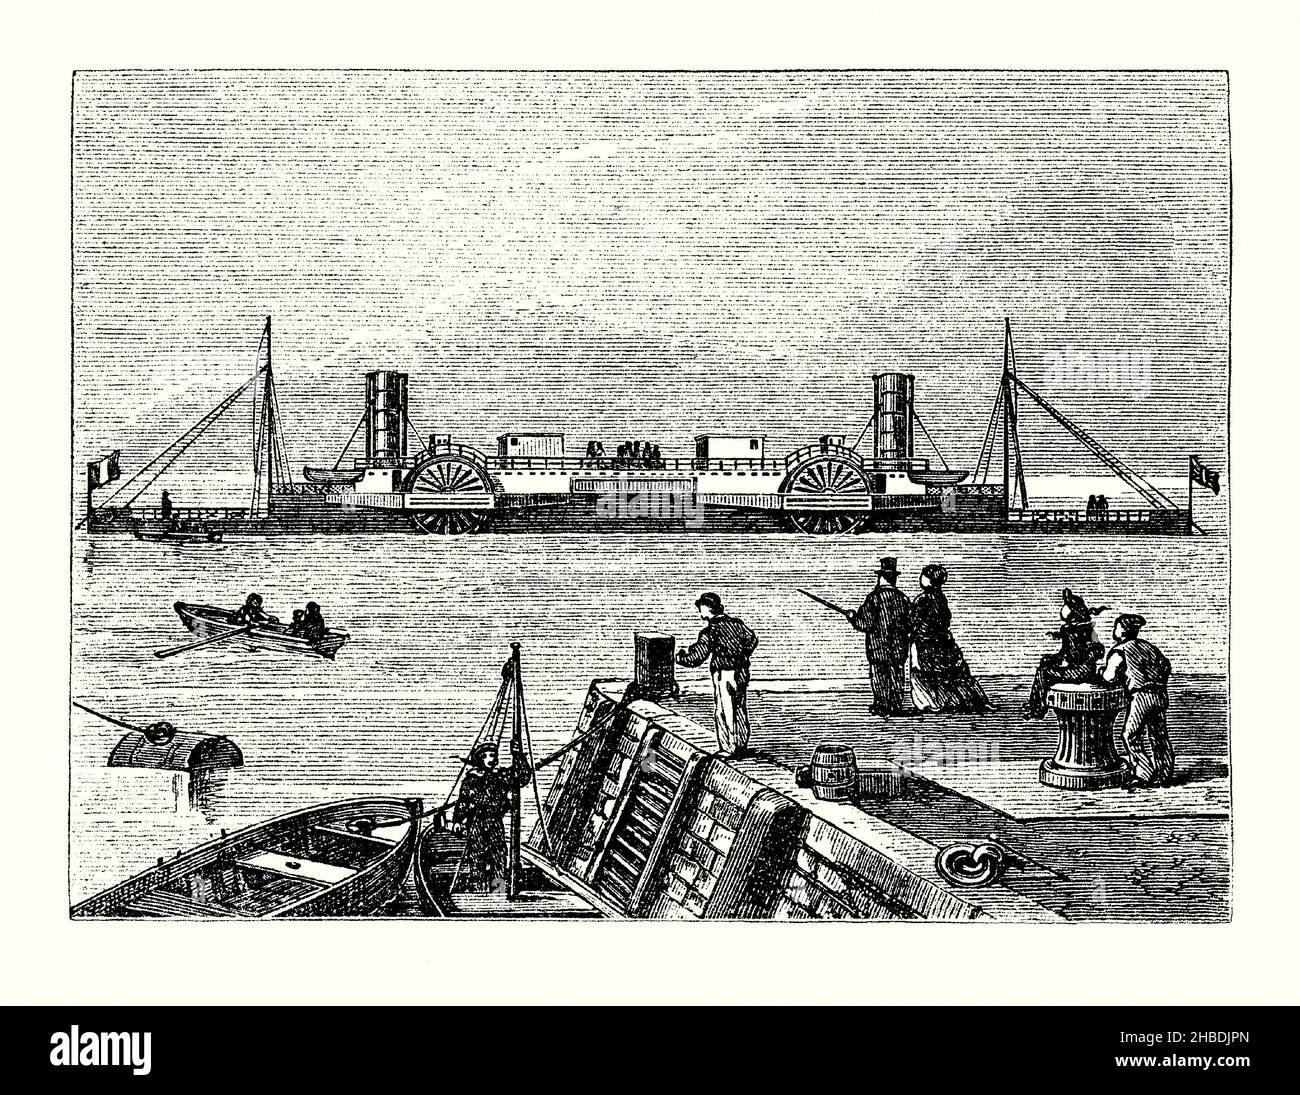 An old engraving of the unusual cross-channel 4-paddle steamer SS Bessemer in the 1870s. It is from a book of the 1890s on discoveries and inventions during the 1800s. The SS Bessemer (Bessemer Saloon) was an experimental cross-Channel ferry with a swinging cabin, devised by Henry Bessemer, to combat seasickness. The ‘Saloon’ was kept horizontal mechanically by means of gimbals to isolate passengers from the ship's motion. The first and only public voyage took place in 1875, the ship sailing with the swinging cabin locked. The ship was sold for scrap in 1879. Stock Photo